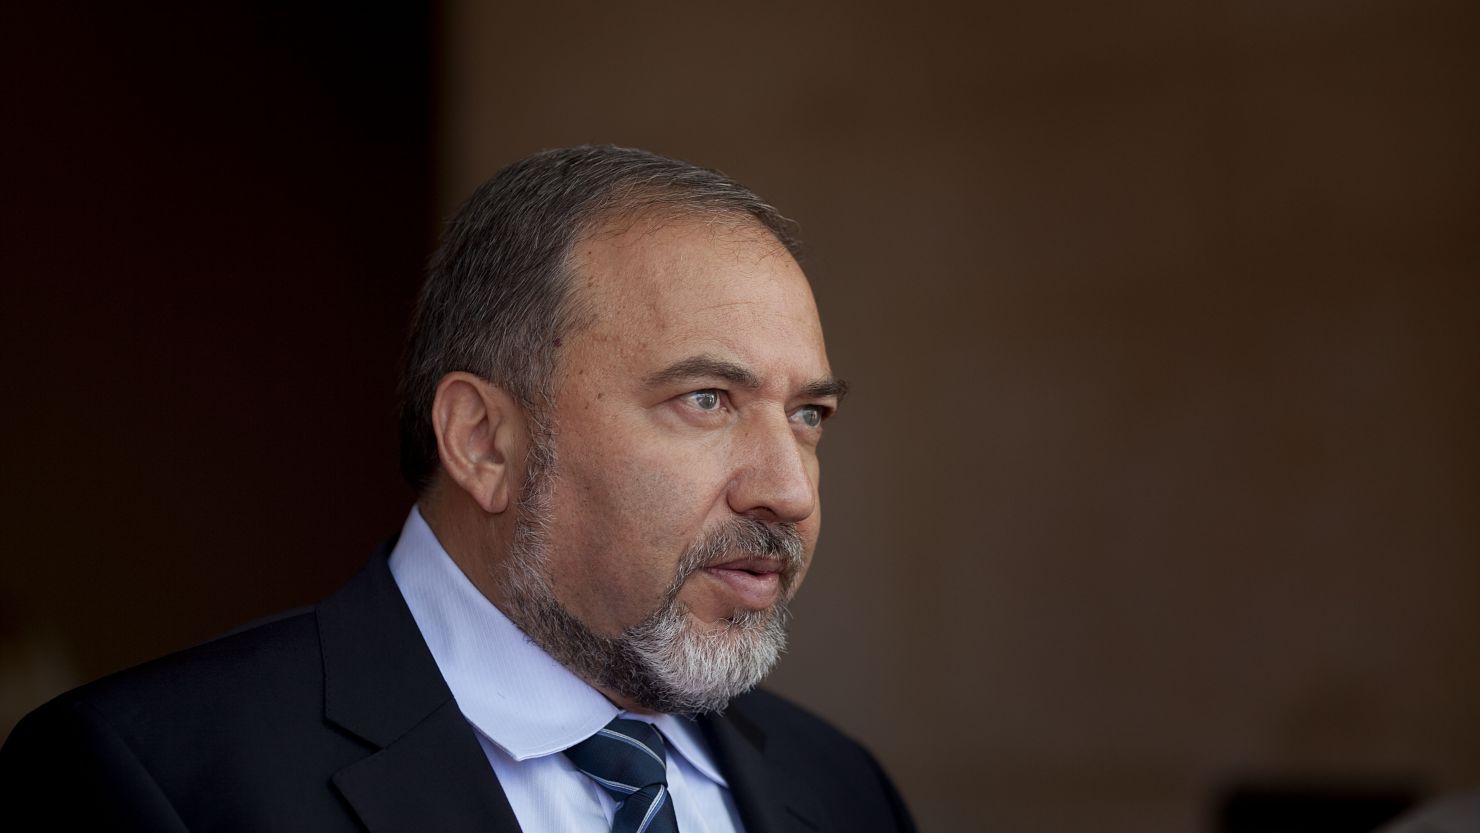 Foreign Minister Avigdor Lieberman announced he would resign after it was announced he would be charged with breach of trust and fraud.